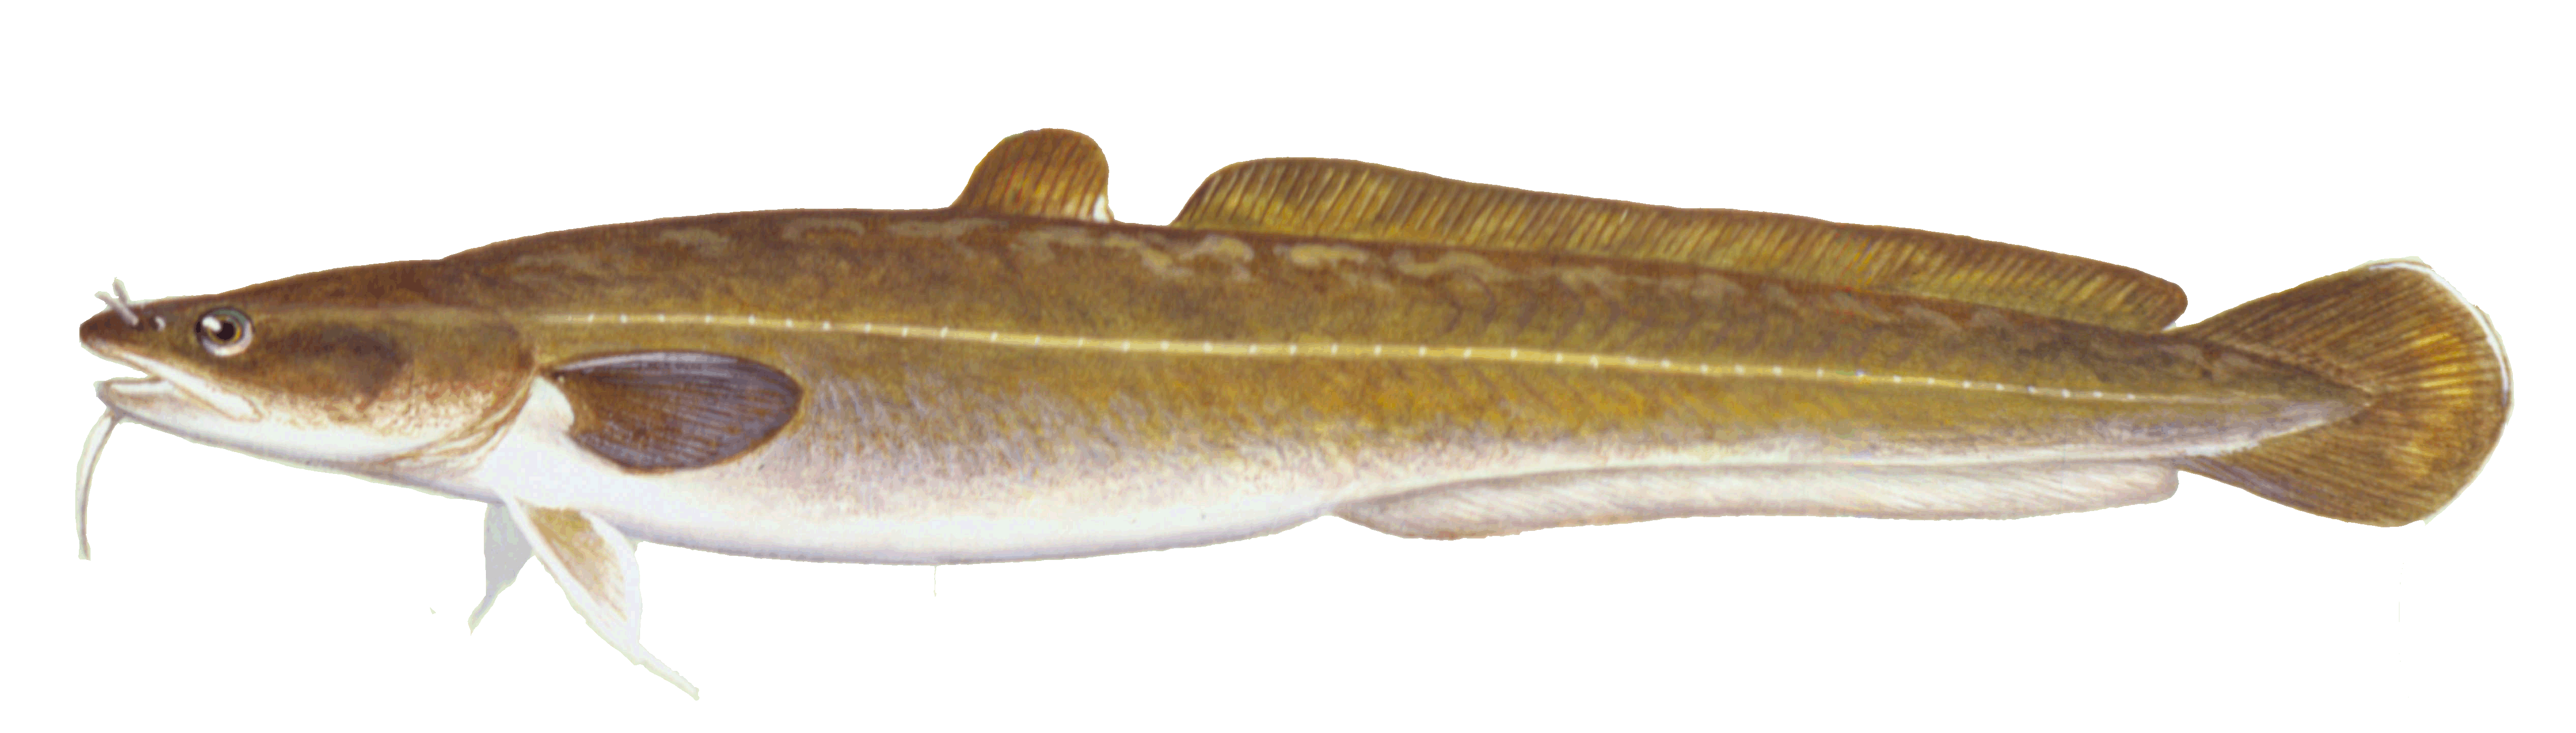 Burbot, illustration by Maynard Reece, from Iowa Fish and Fishing.